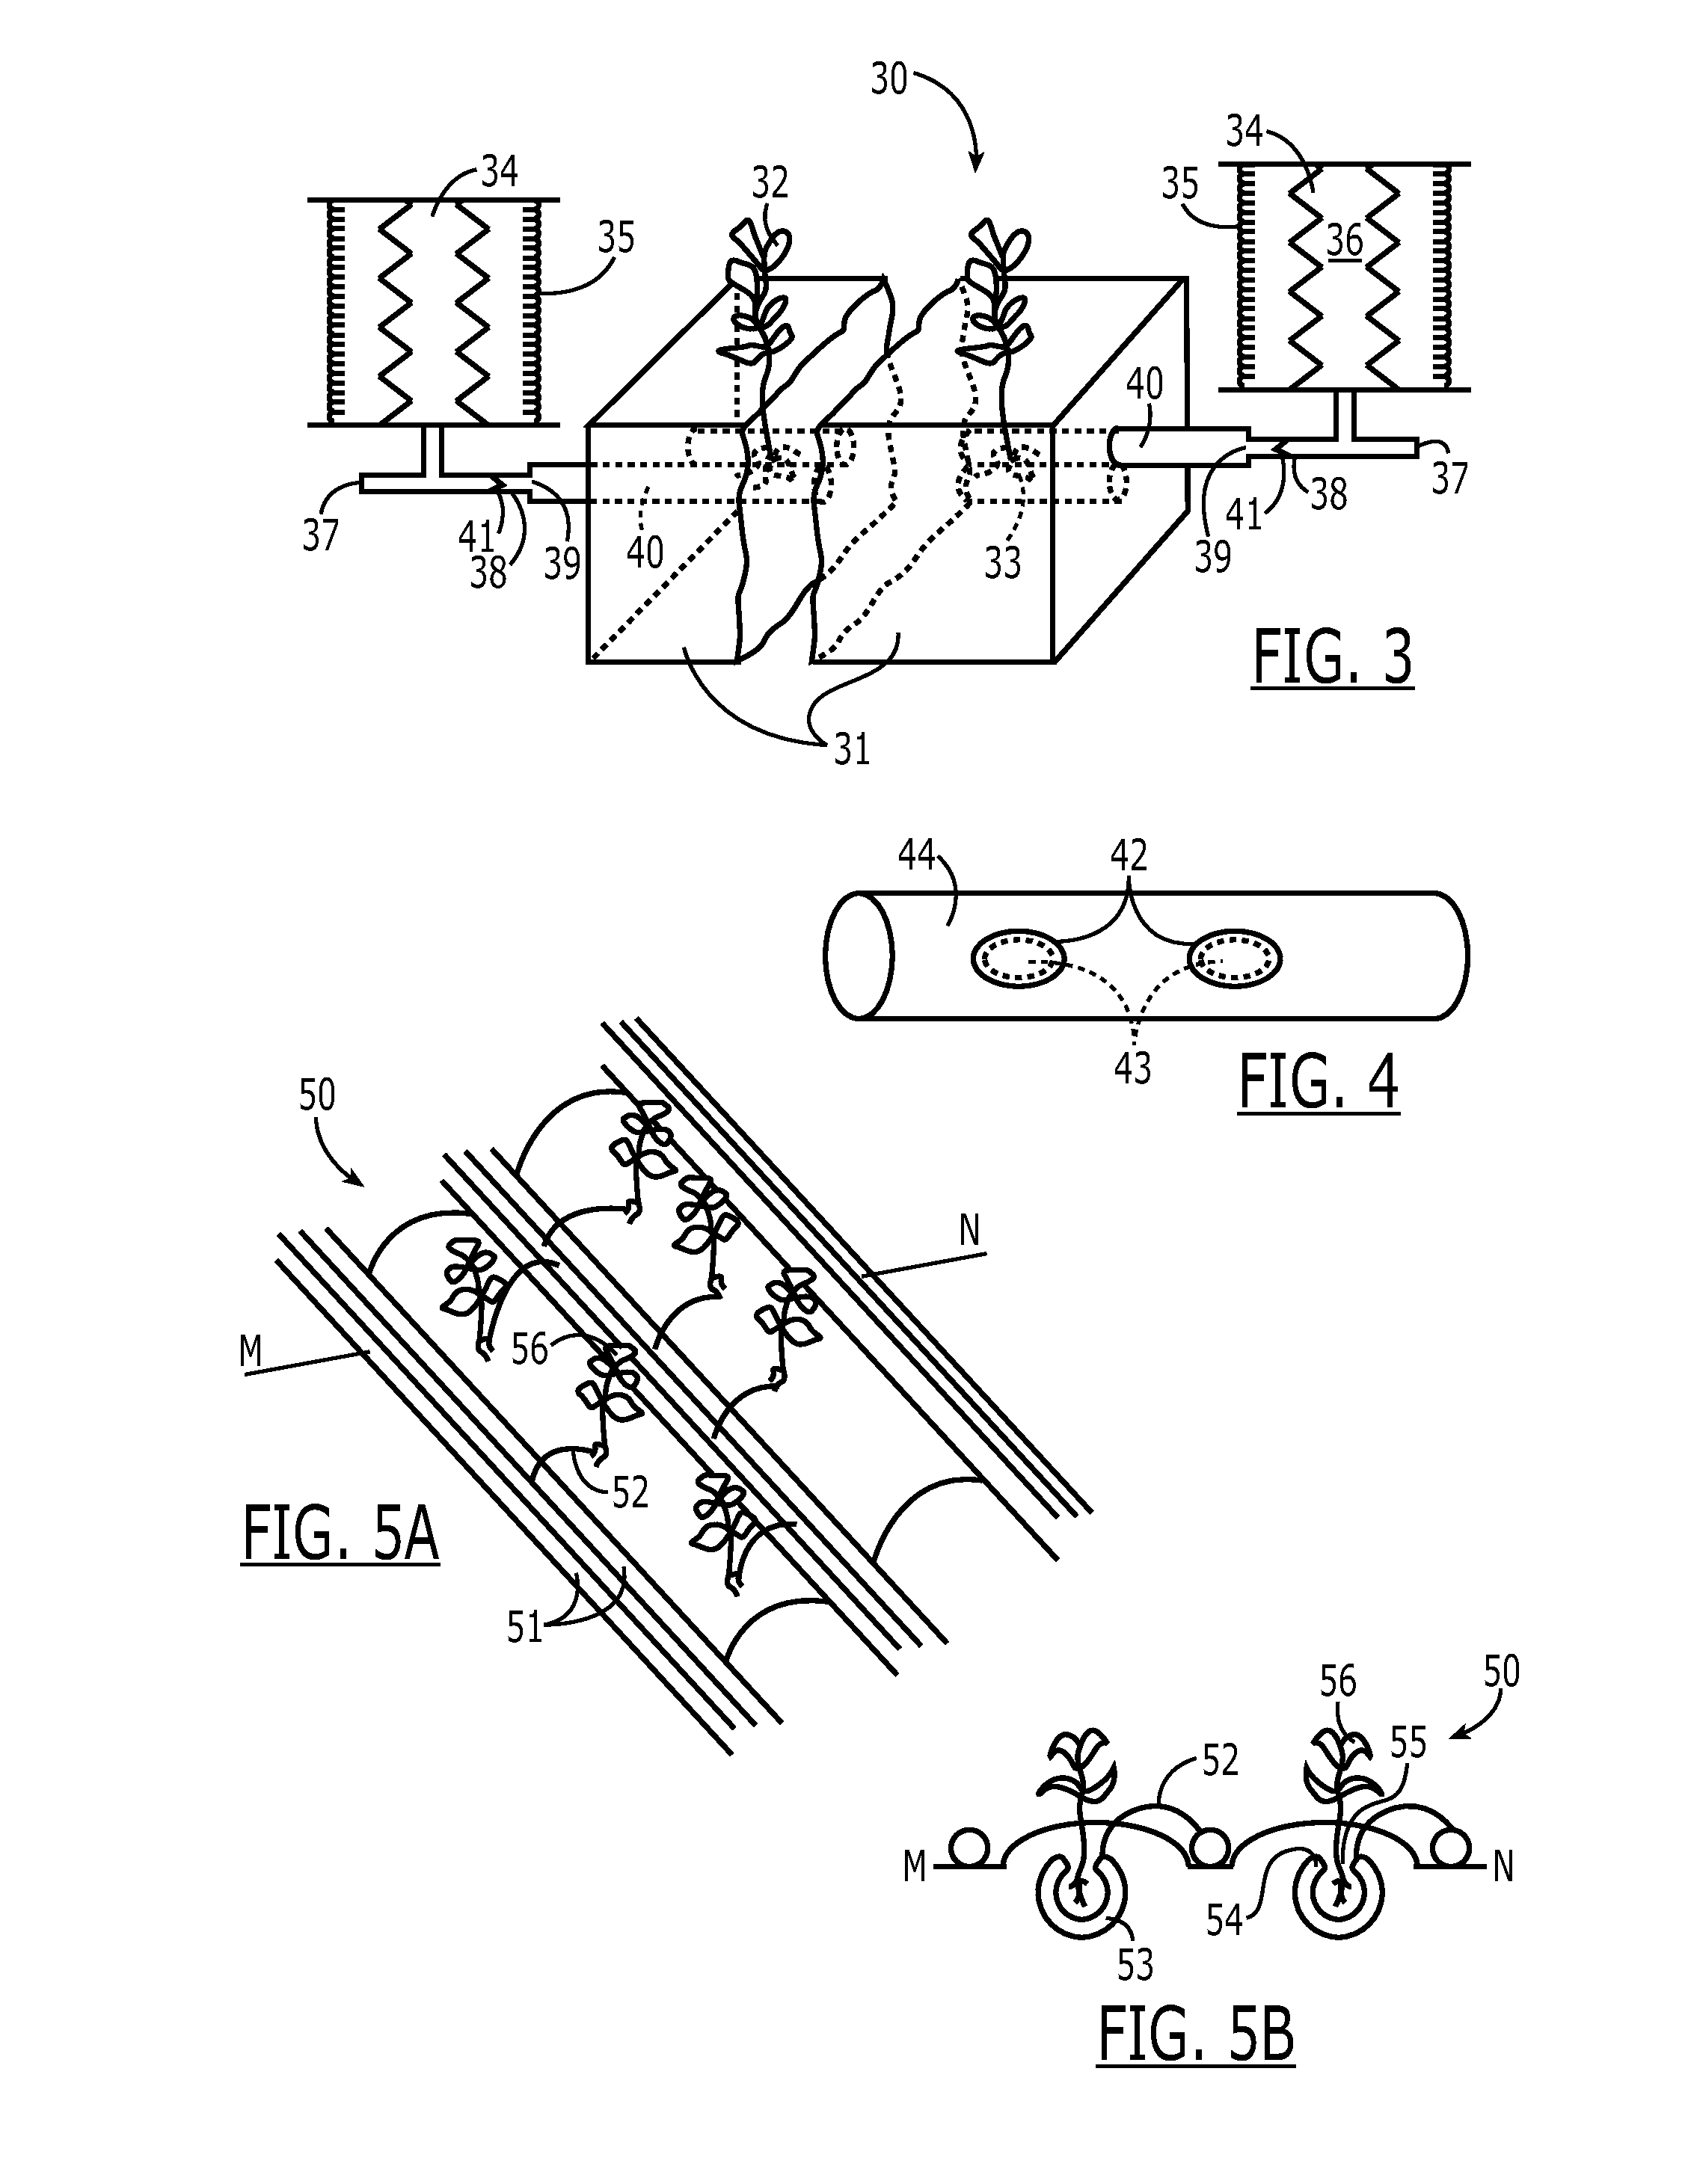 Fluid and nutrient delivery irrigation system and associated methods